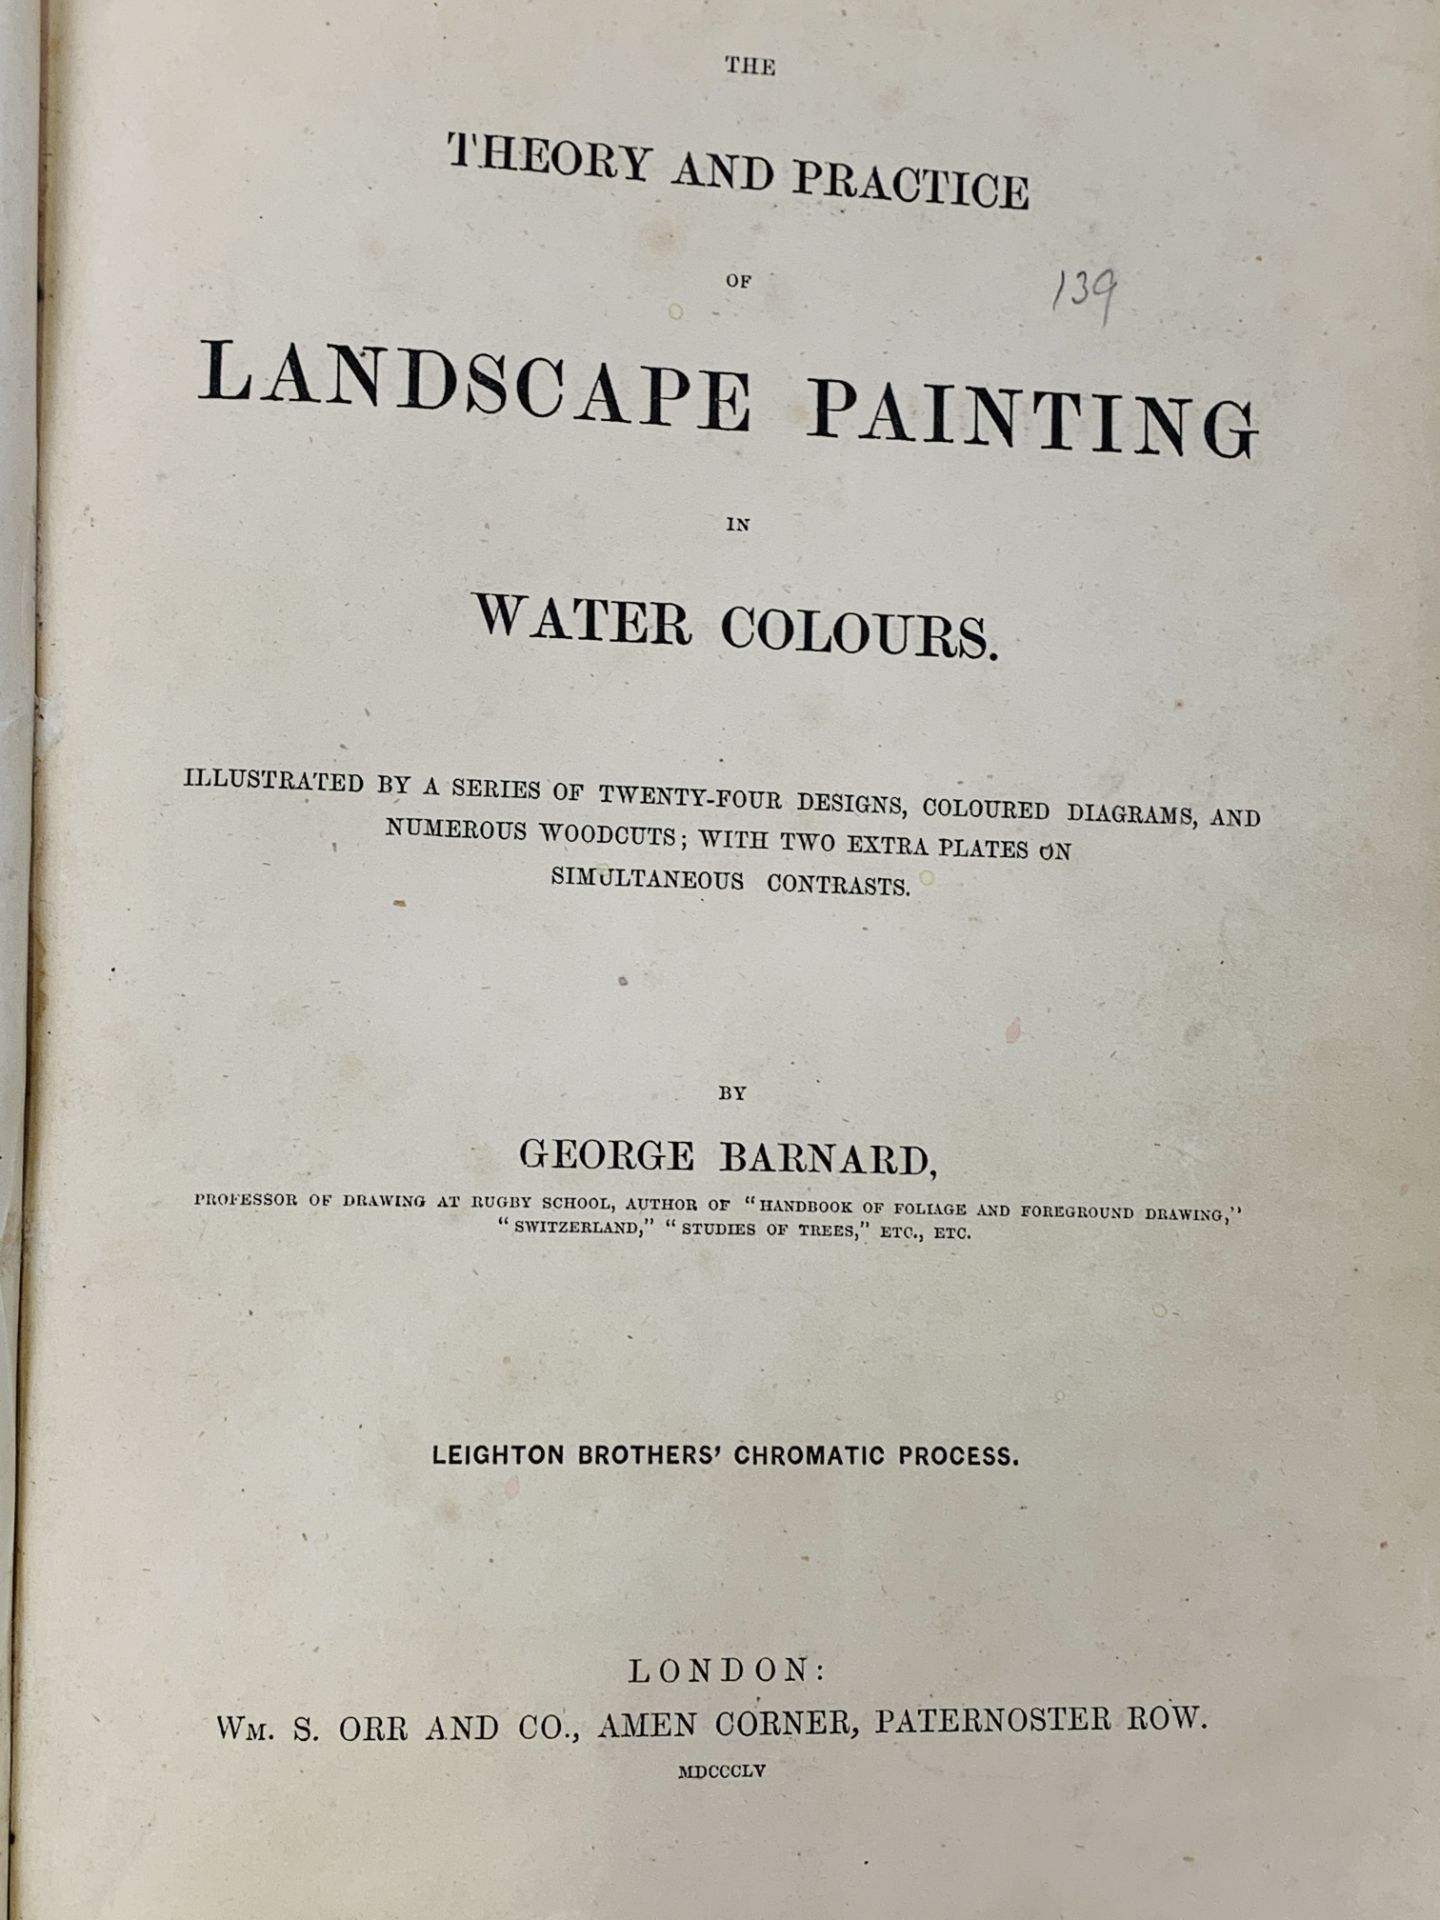 Landscape Painting in Watercolours, 1855, Sketching Without a Master, and Linear Perspective - Image 4 of 7